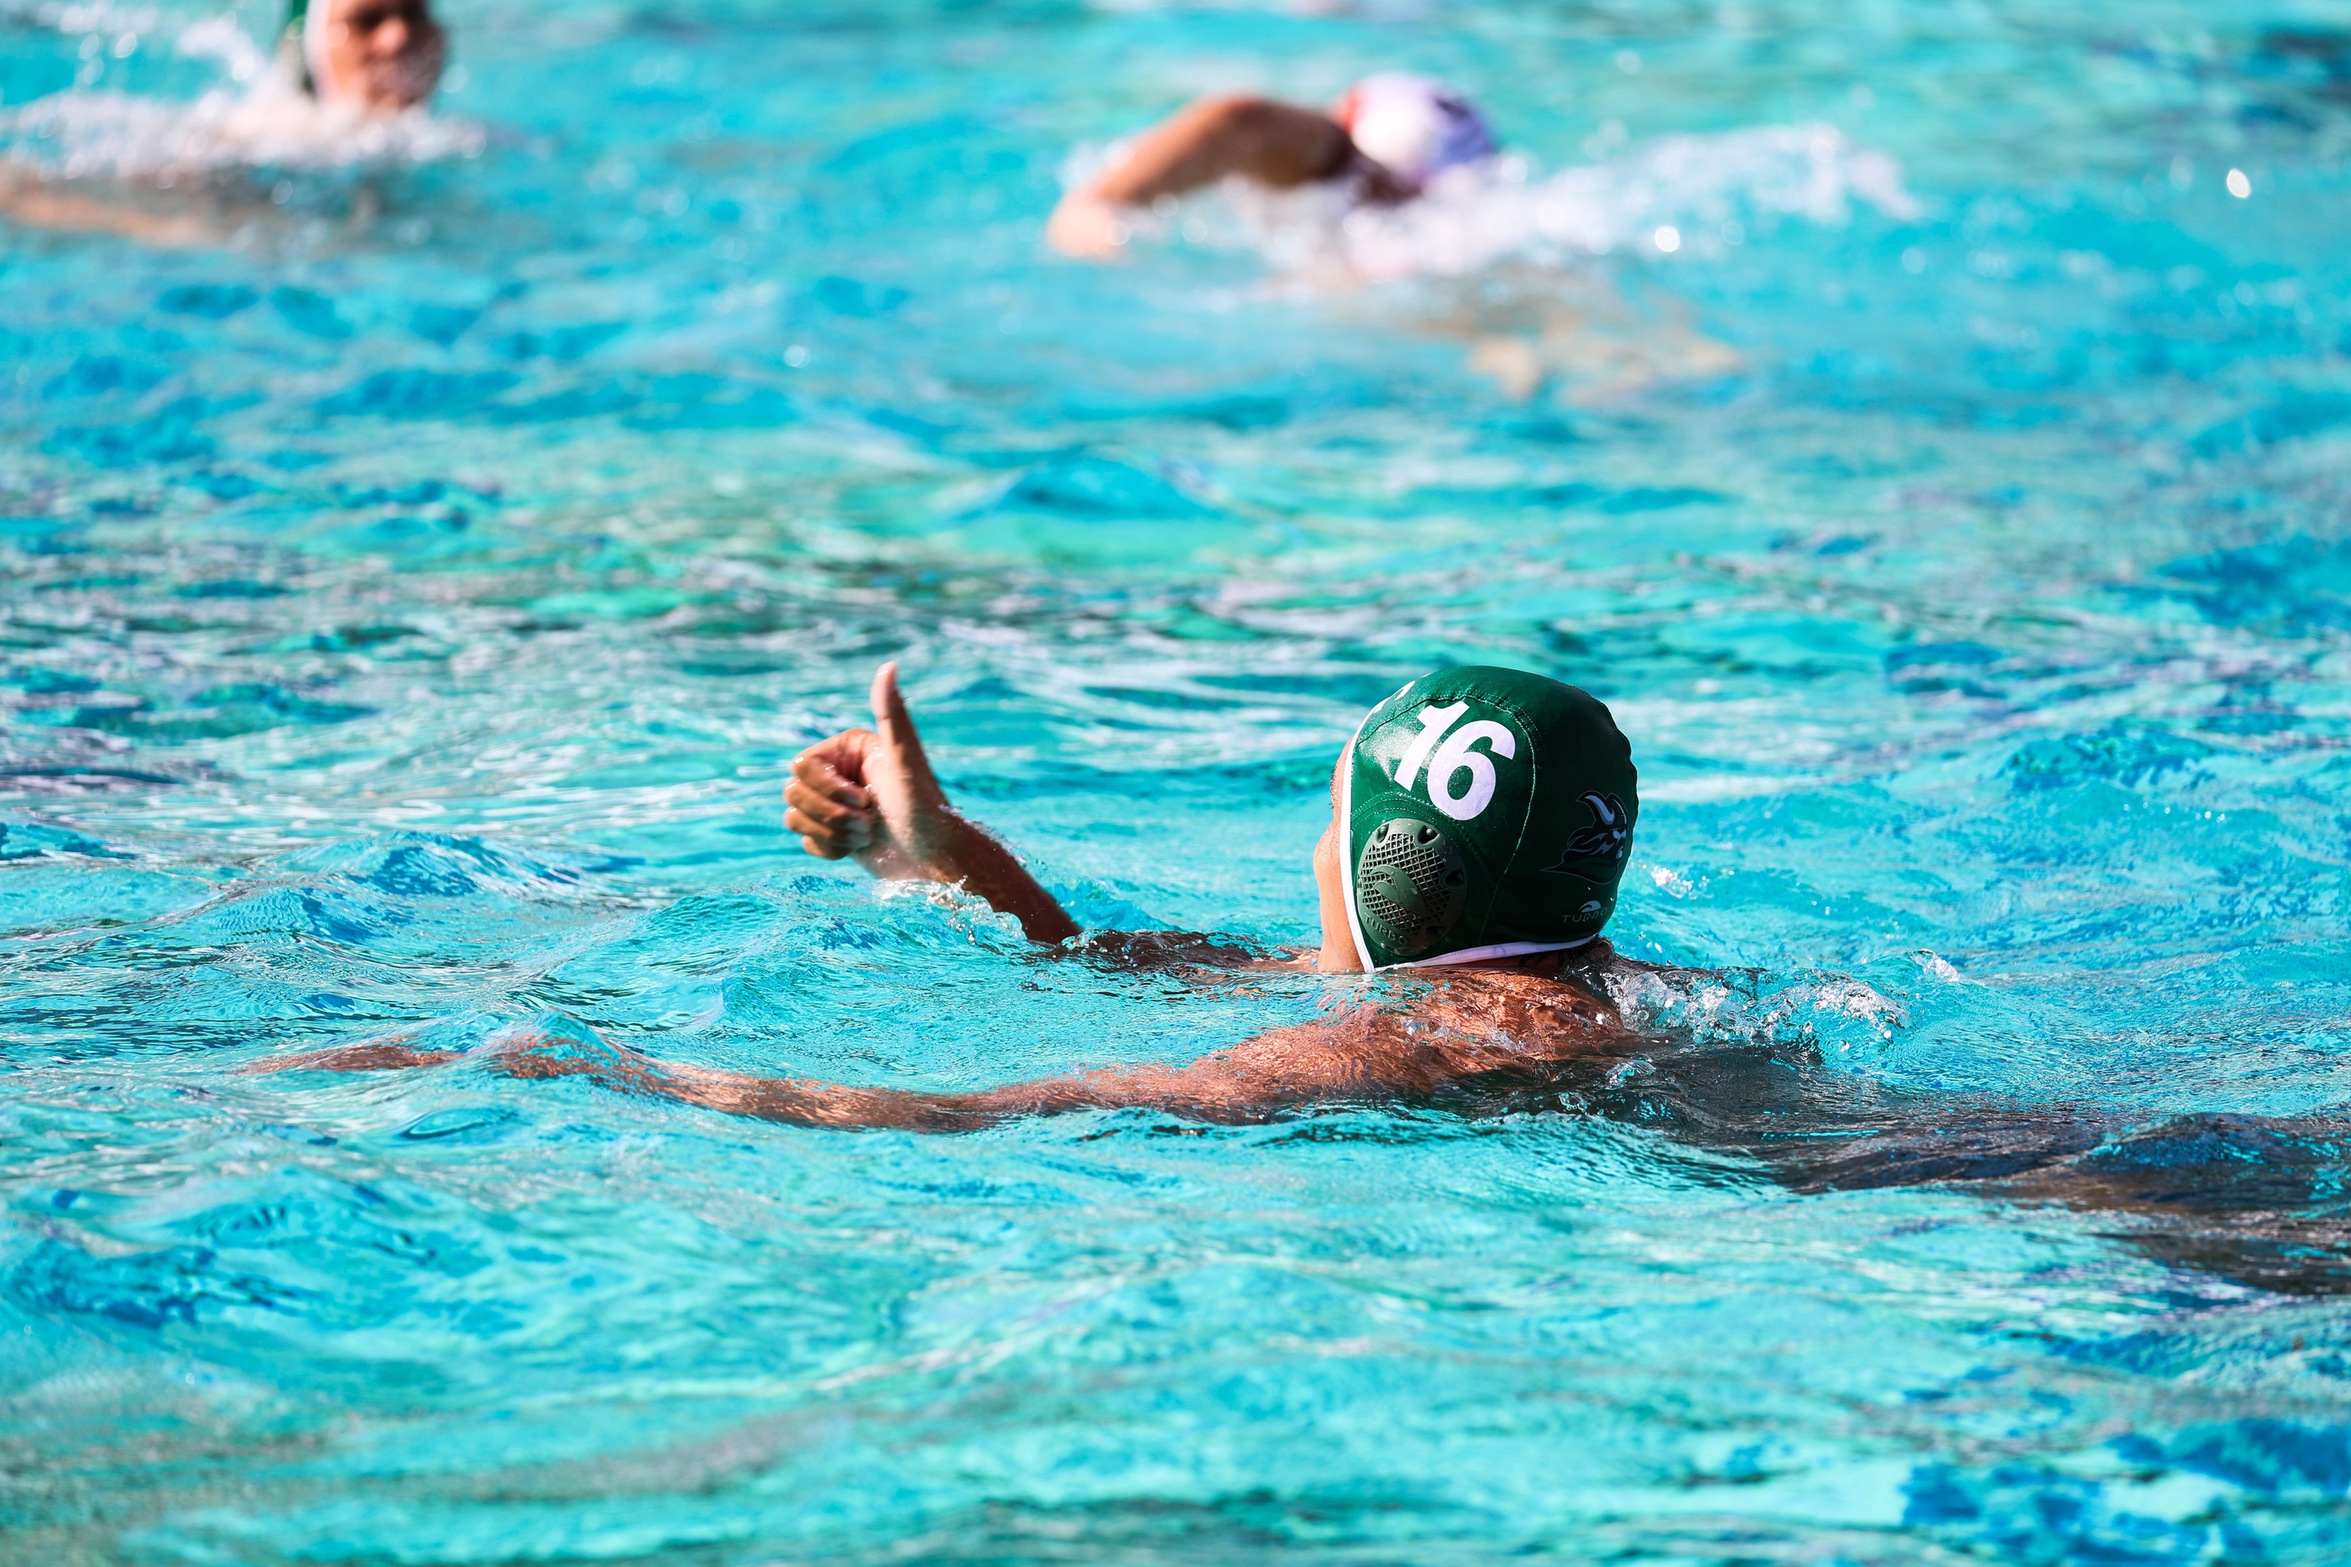 Men's Water Polo keep win streak alive, move to 10 in a row with wins over LPC and Delta